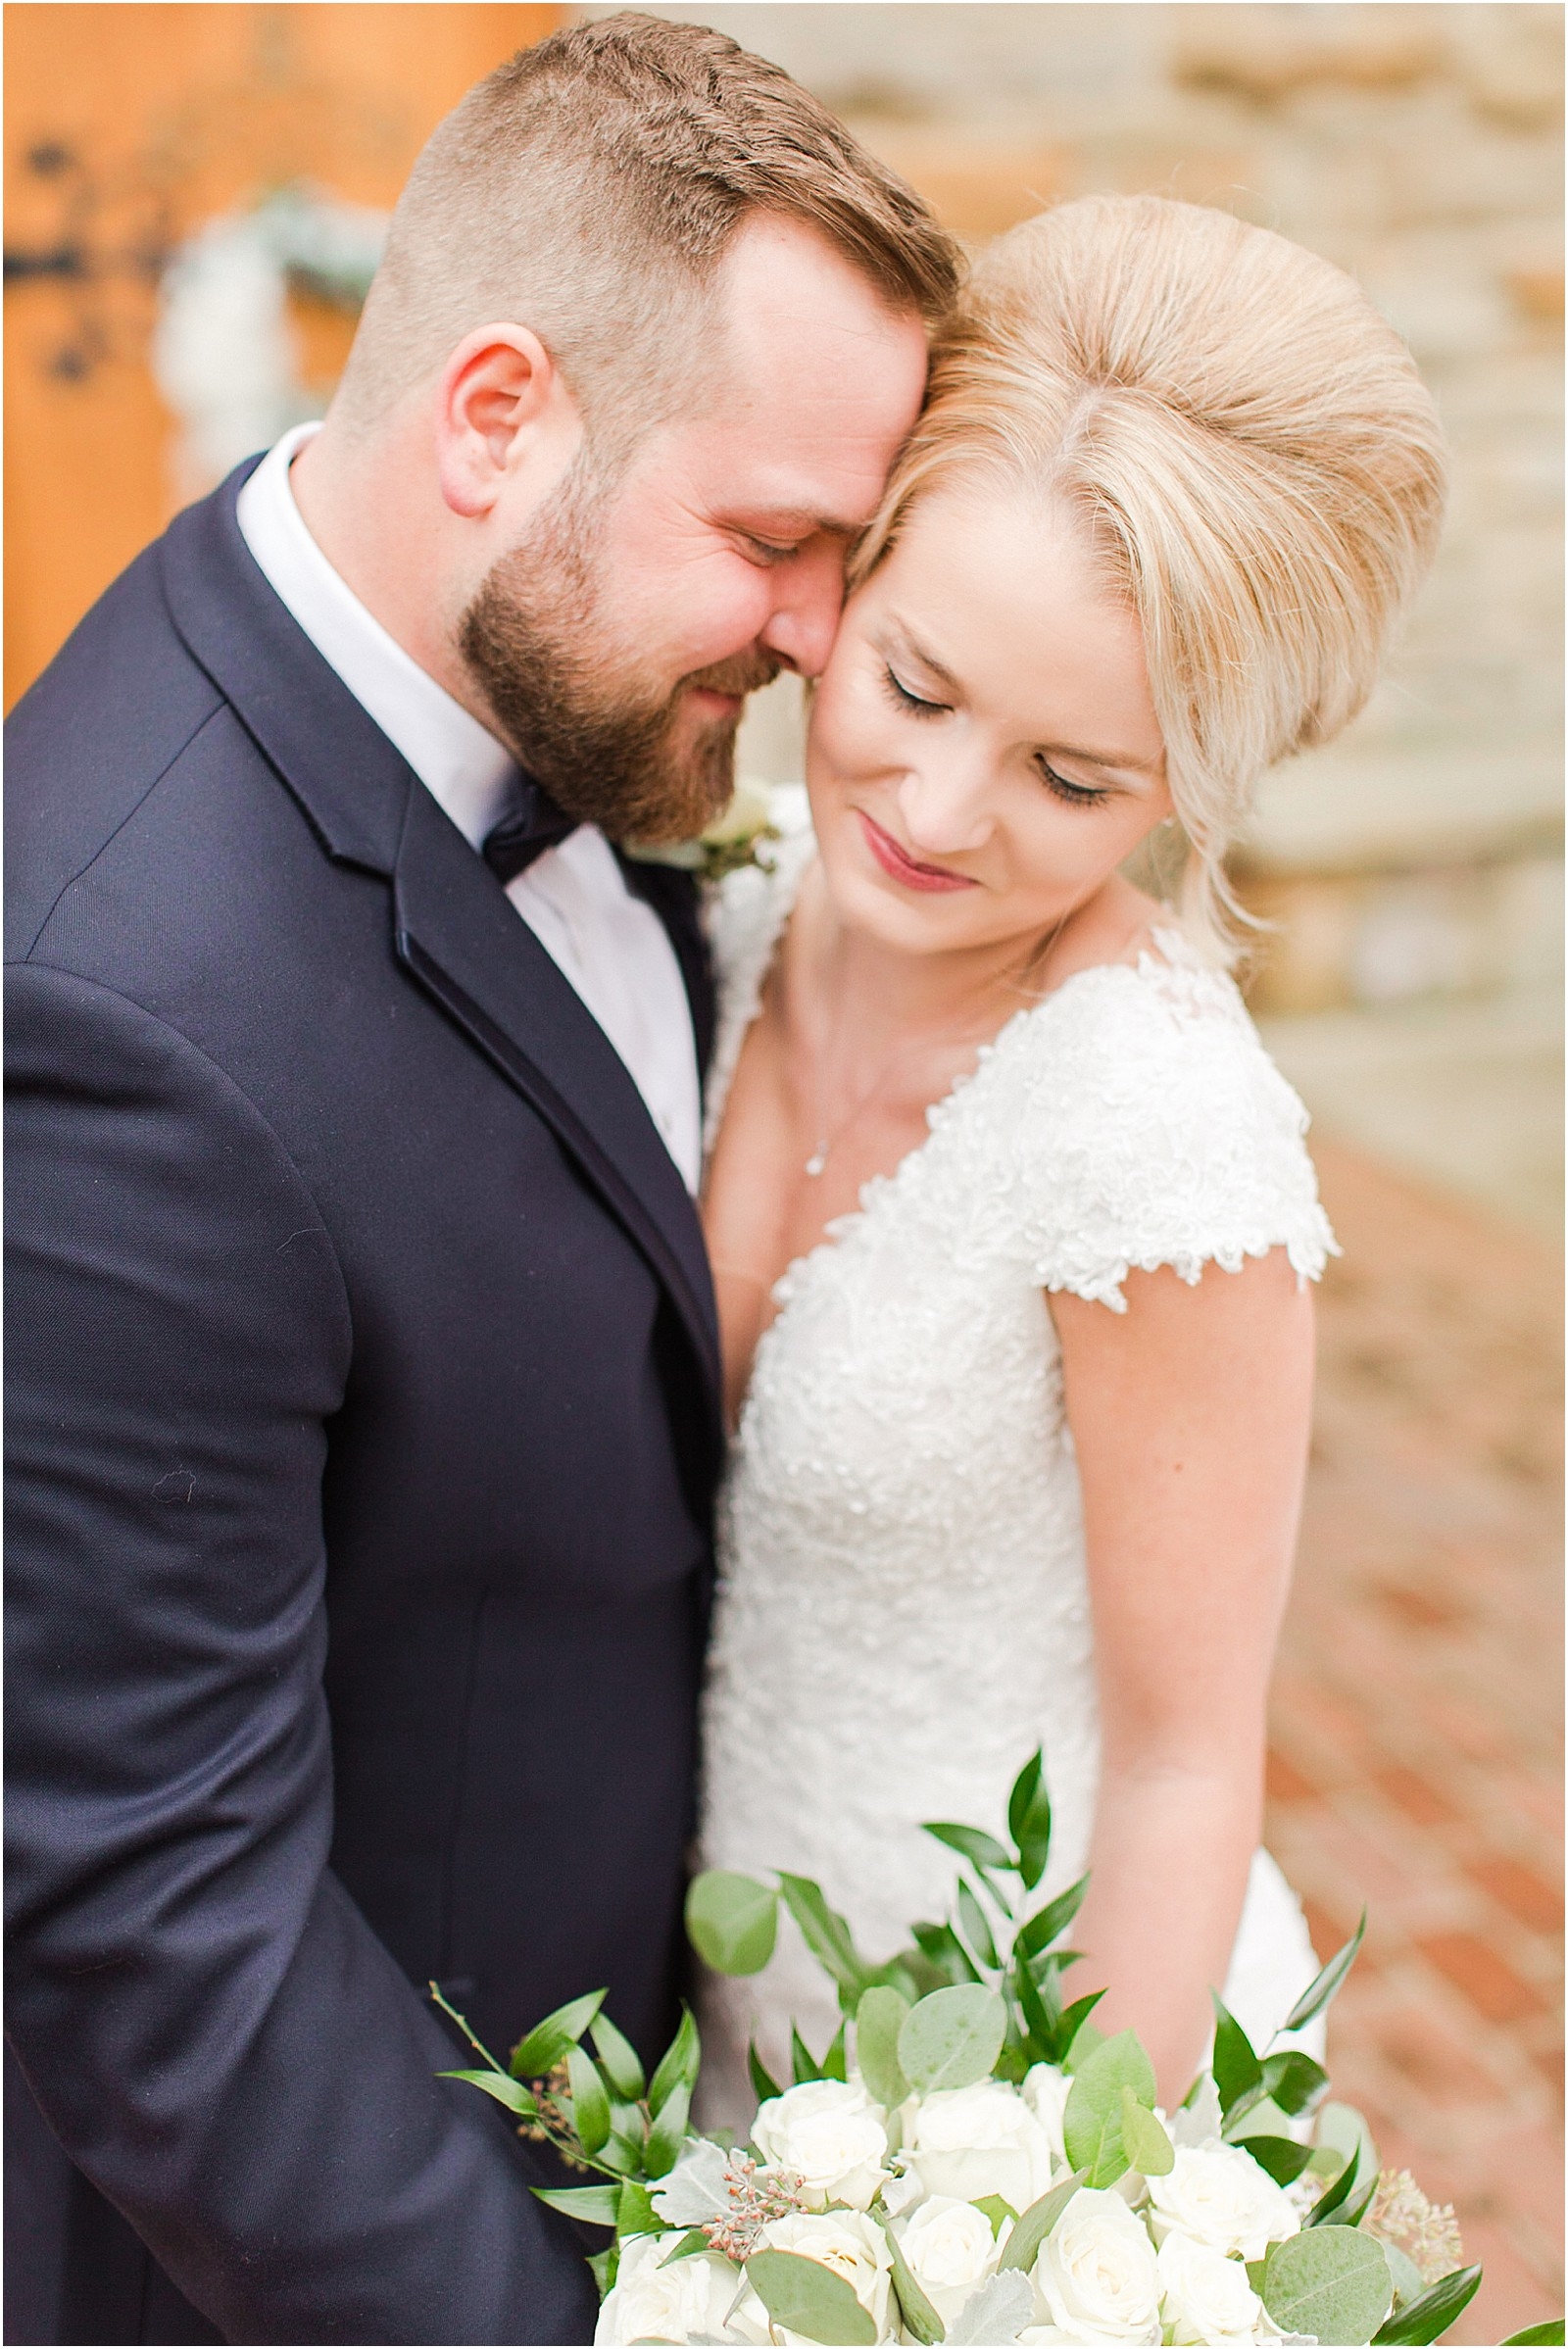 A Classic Winter Wedding in New Harmony | Rachel and Ryan | Bret and Brandie Photography 0060.jpg